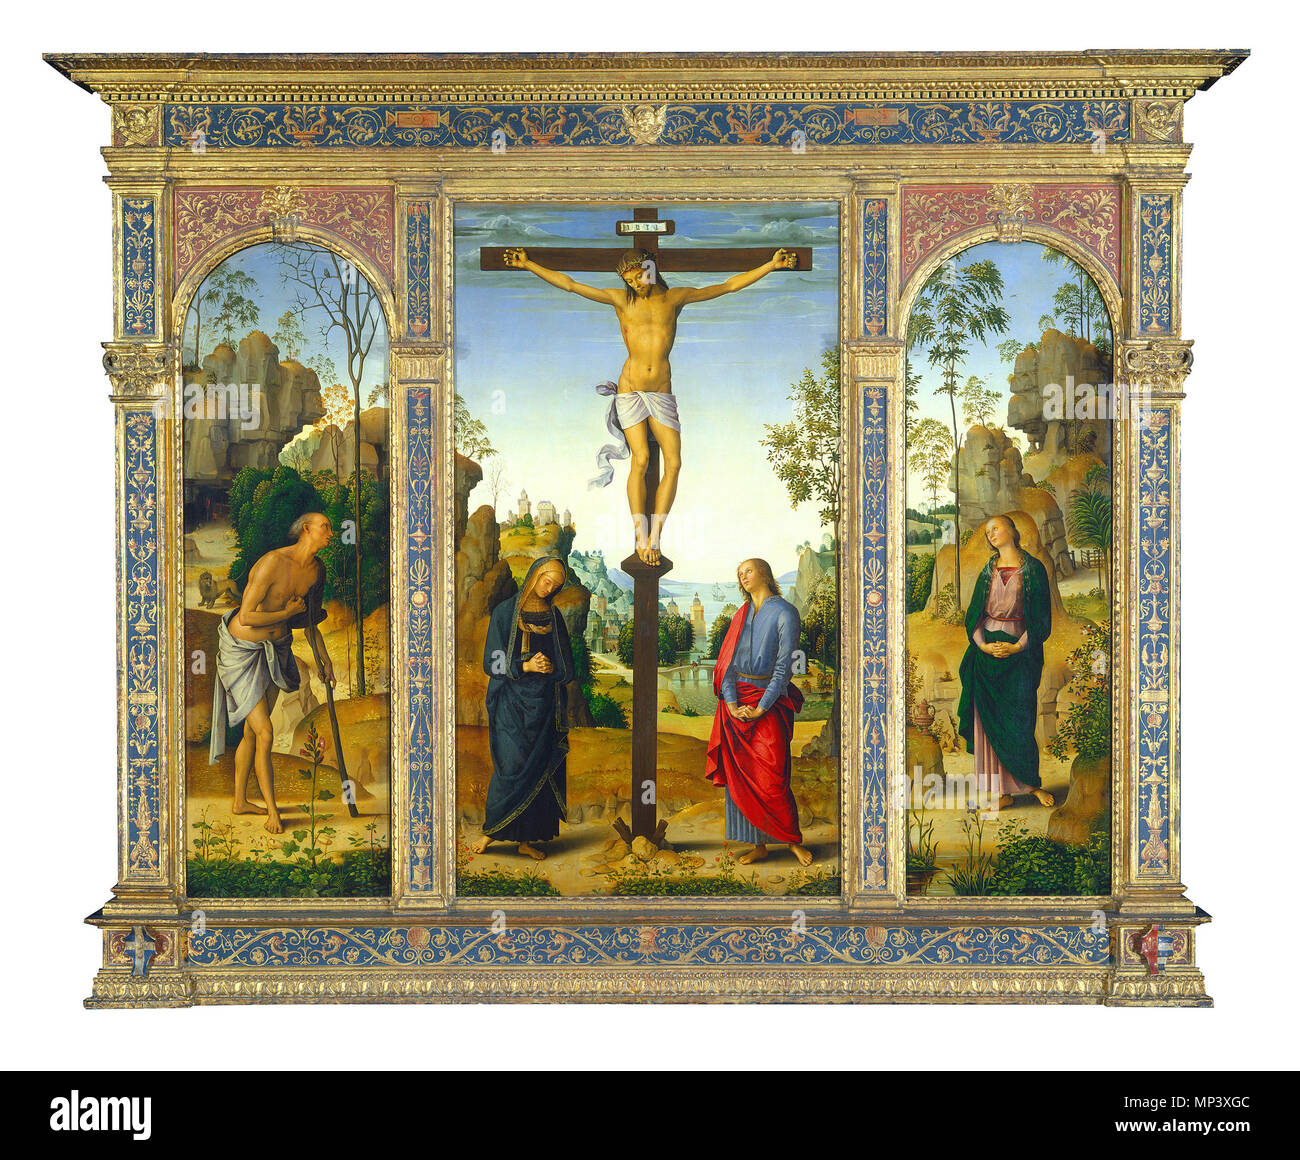 Pietro Perugino, The Crucifixion with the Virgin, Saint John, Saint Jerome, and Saint Mary Magdalene [left panel], Italian, c. 1450 - 1523, c. 1482/1485, oil on panel transferred to canvas, Andrew W. Mellon Collection   Galitzin-Triptych Alternative title(s): Crucifixion with Mary and Saint John Evangelist, and Saint Mary Magdalene (right) . the landscape is painted in the serene atmosphere of the scene, influence of flemish paintings . between 1482 and 1485.   974 Perugino - The Crucifixion with the Virgin, Saints John, Jerome, and Mary Magdalene - Galitzin-Triptych Stock Photo